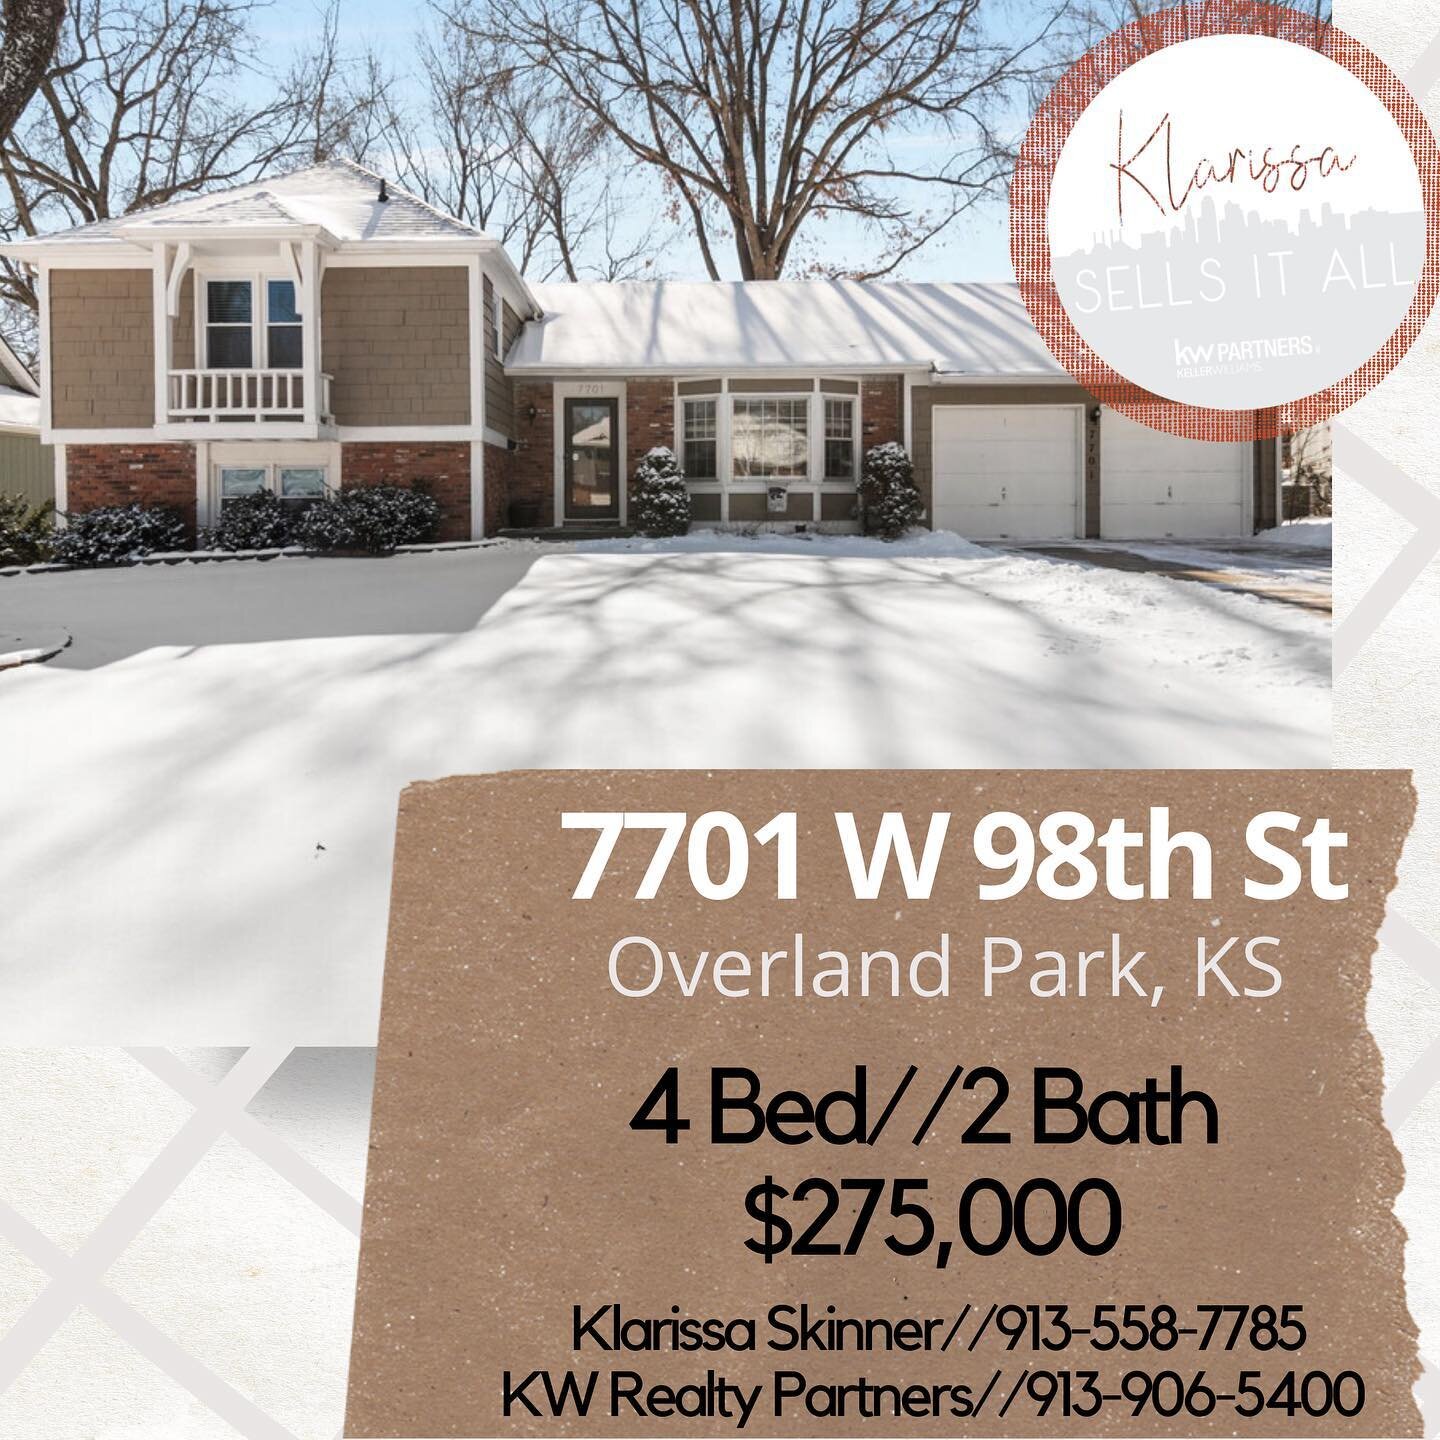 ❄️Just Listed❄️ 

Don&rsquo;t miss this one in Overland Park, we know it won&rsquo;t last long! 

 #kansascity #leessummit #realestate #KellerWilliams #klarissasellsitall #johnsoncountyrealestate #johnsoncountyks #realestateagent #realestateinvestor 